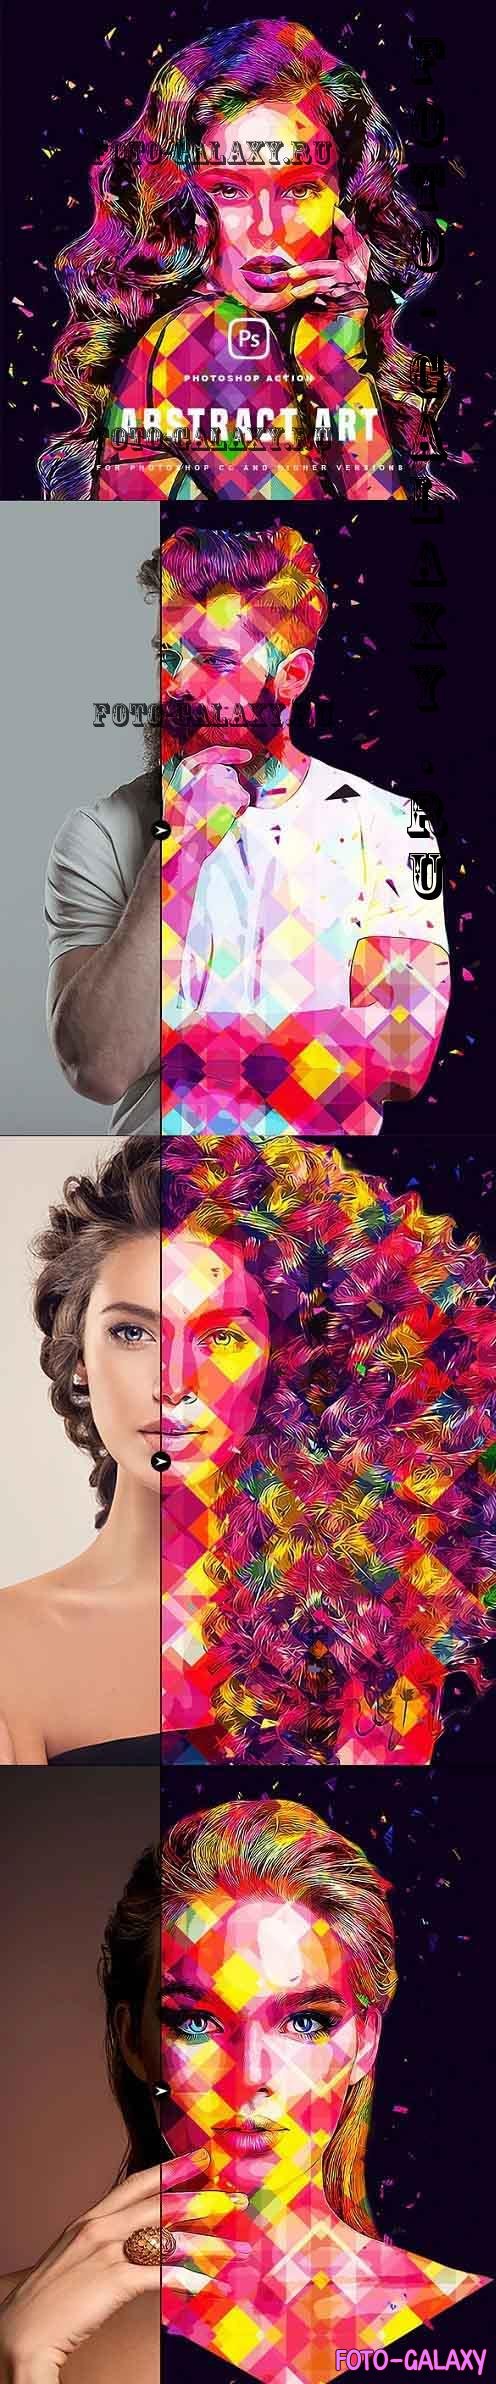 Abstract Art Photoshop Action - 36400251